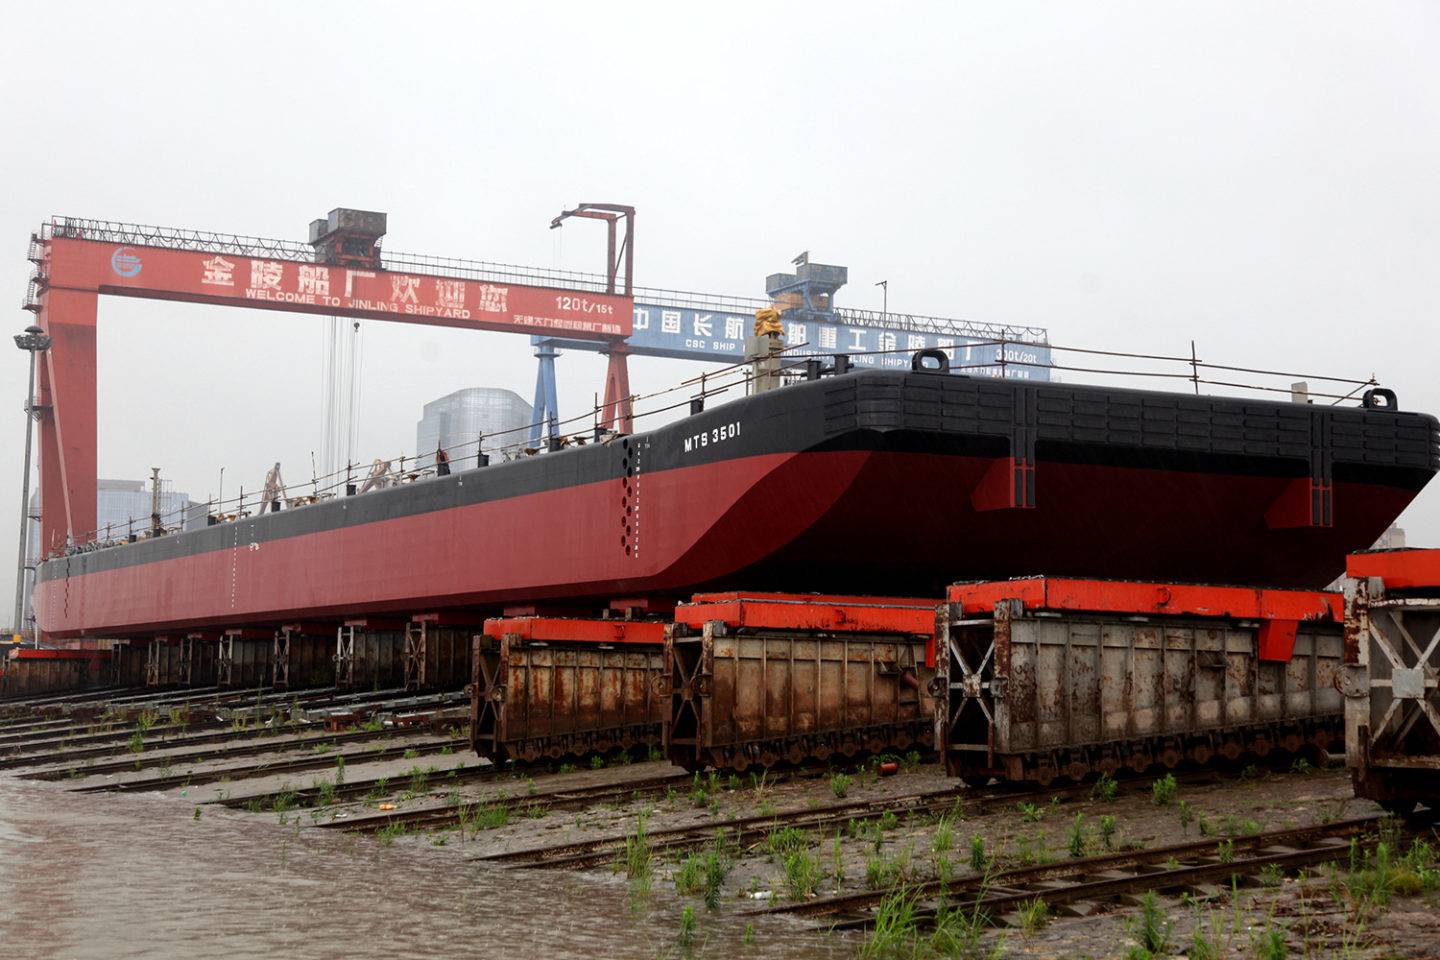 Four barges launched for Canada's Marine Transportation Services